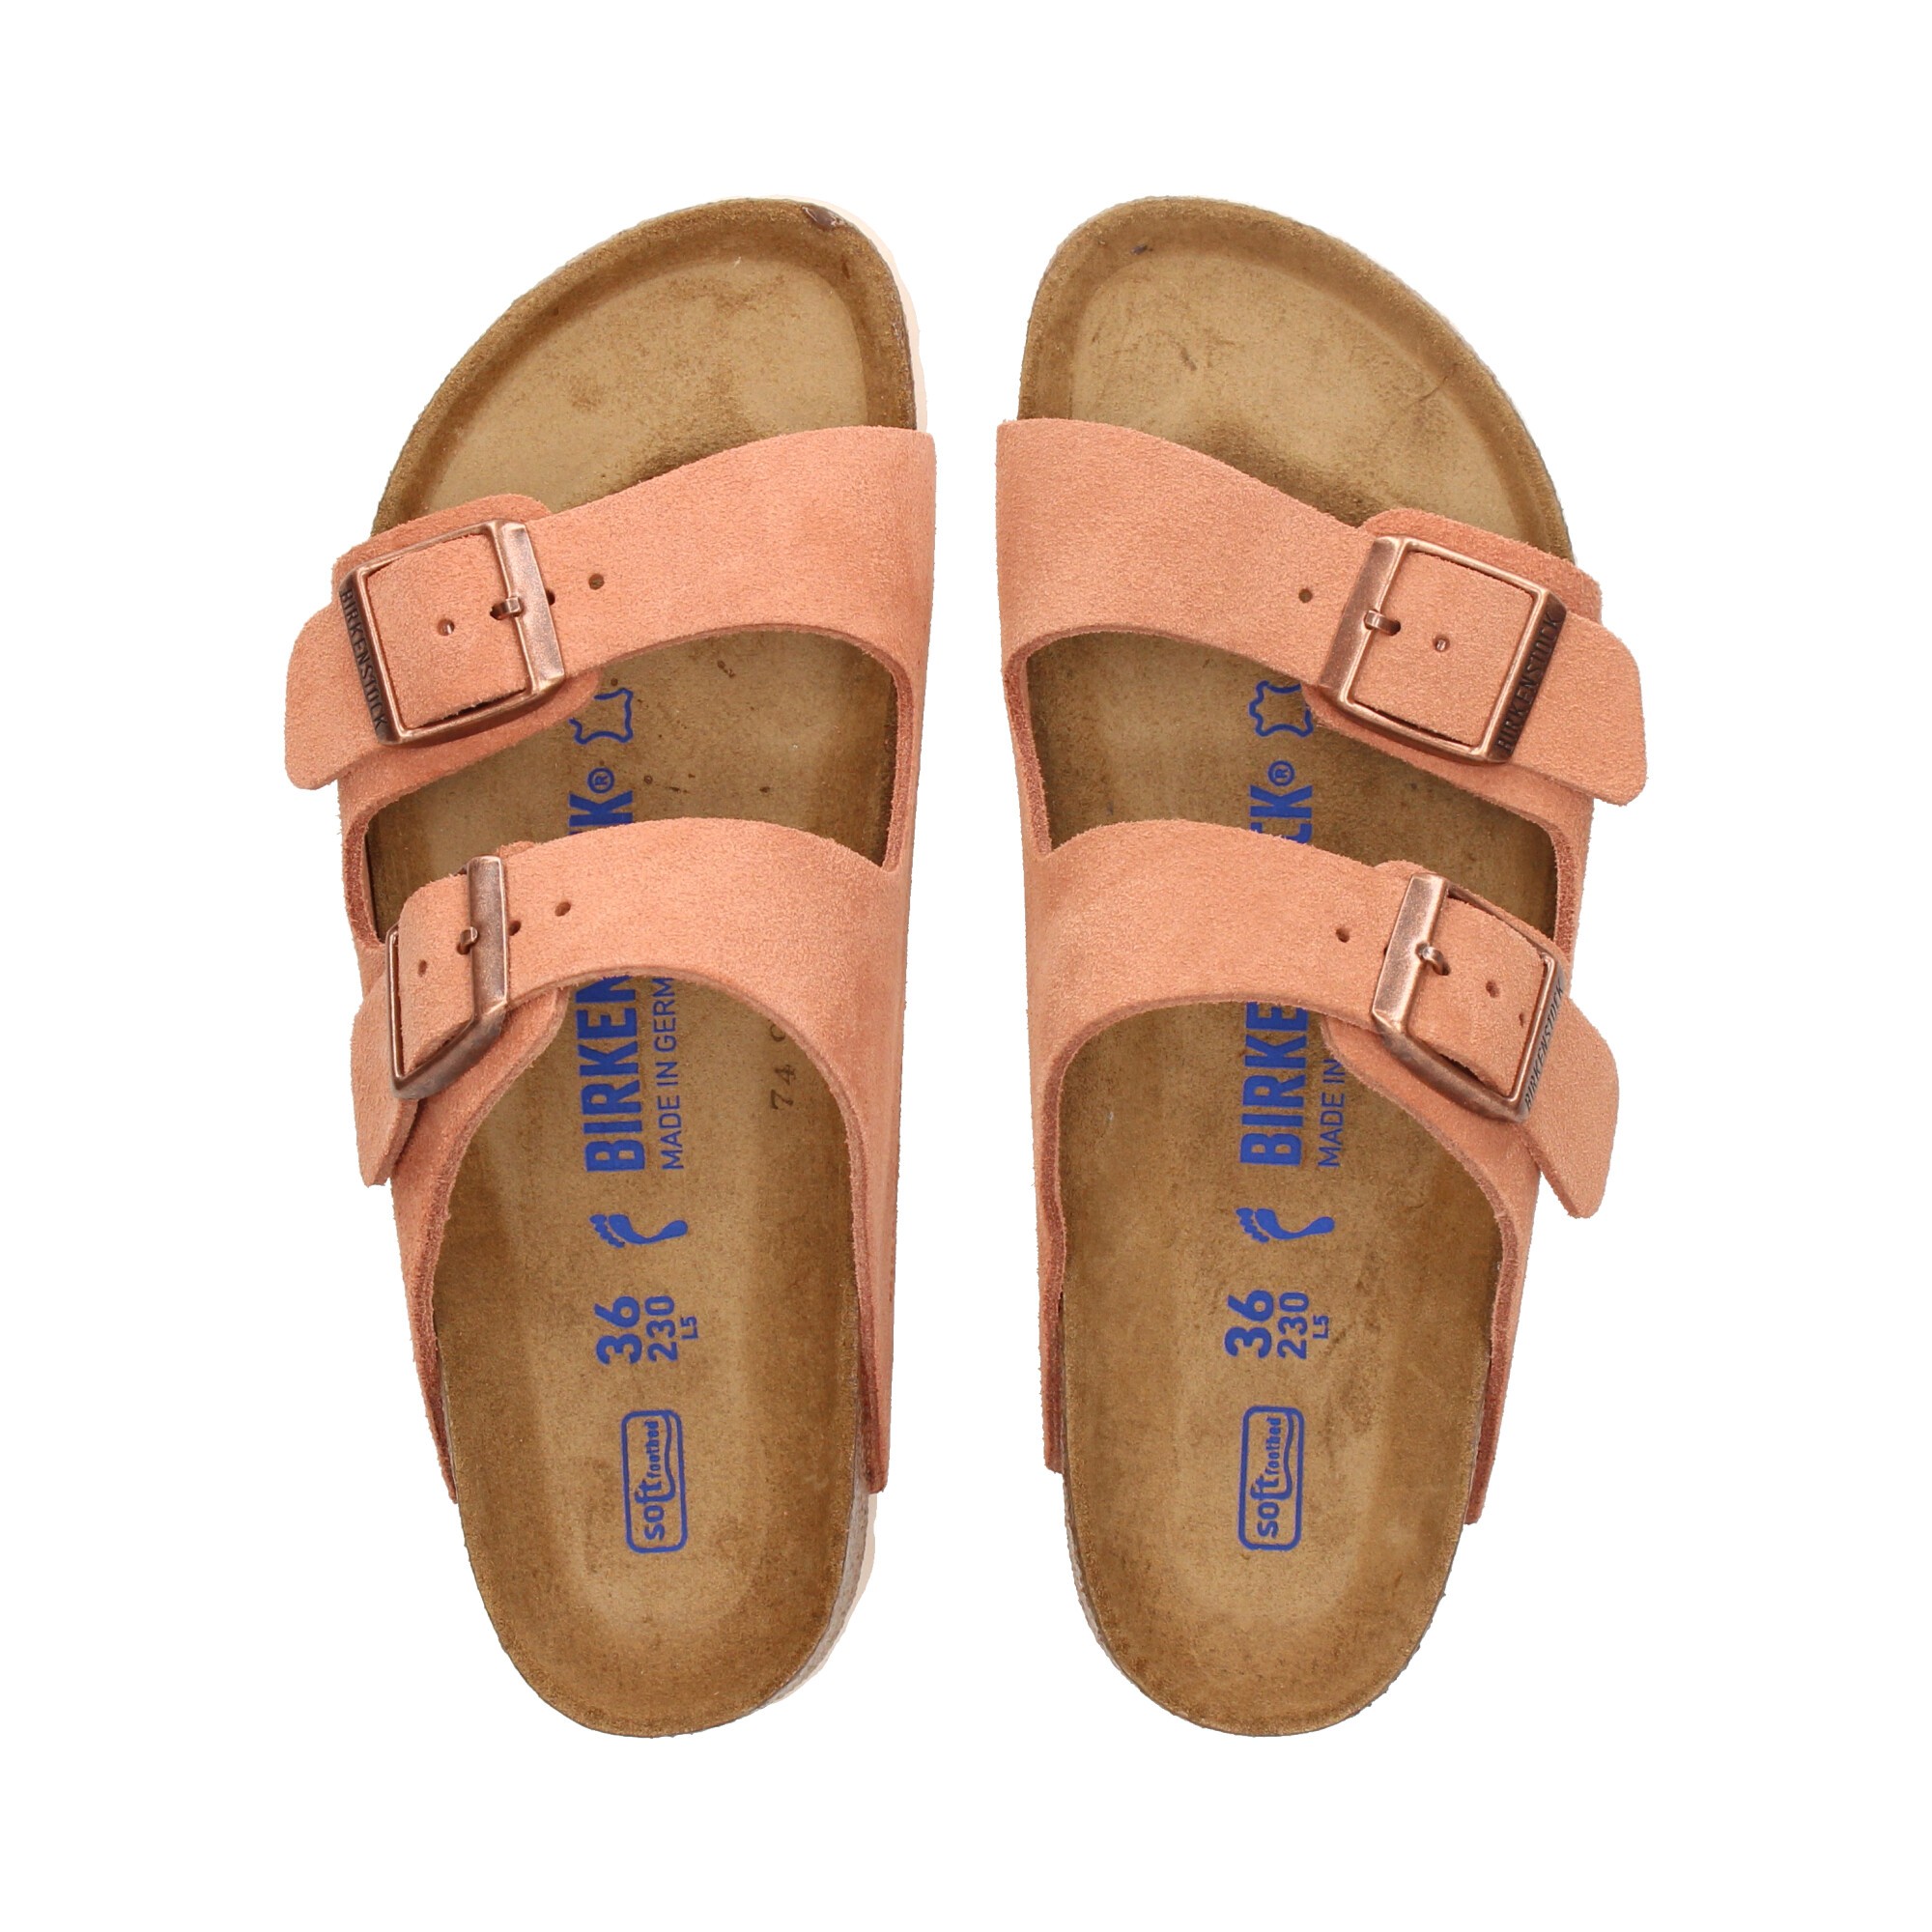 sandal-2-brown-suede-leather-straps